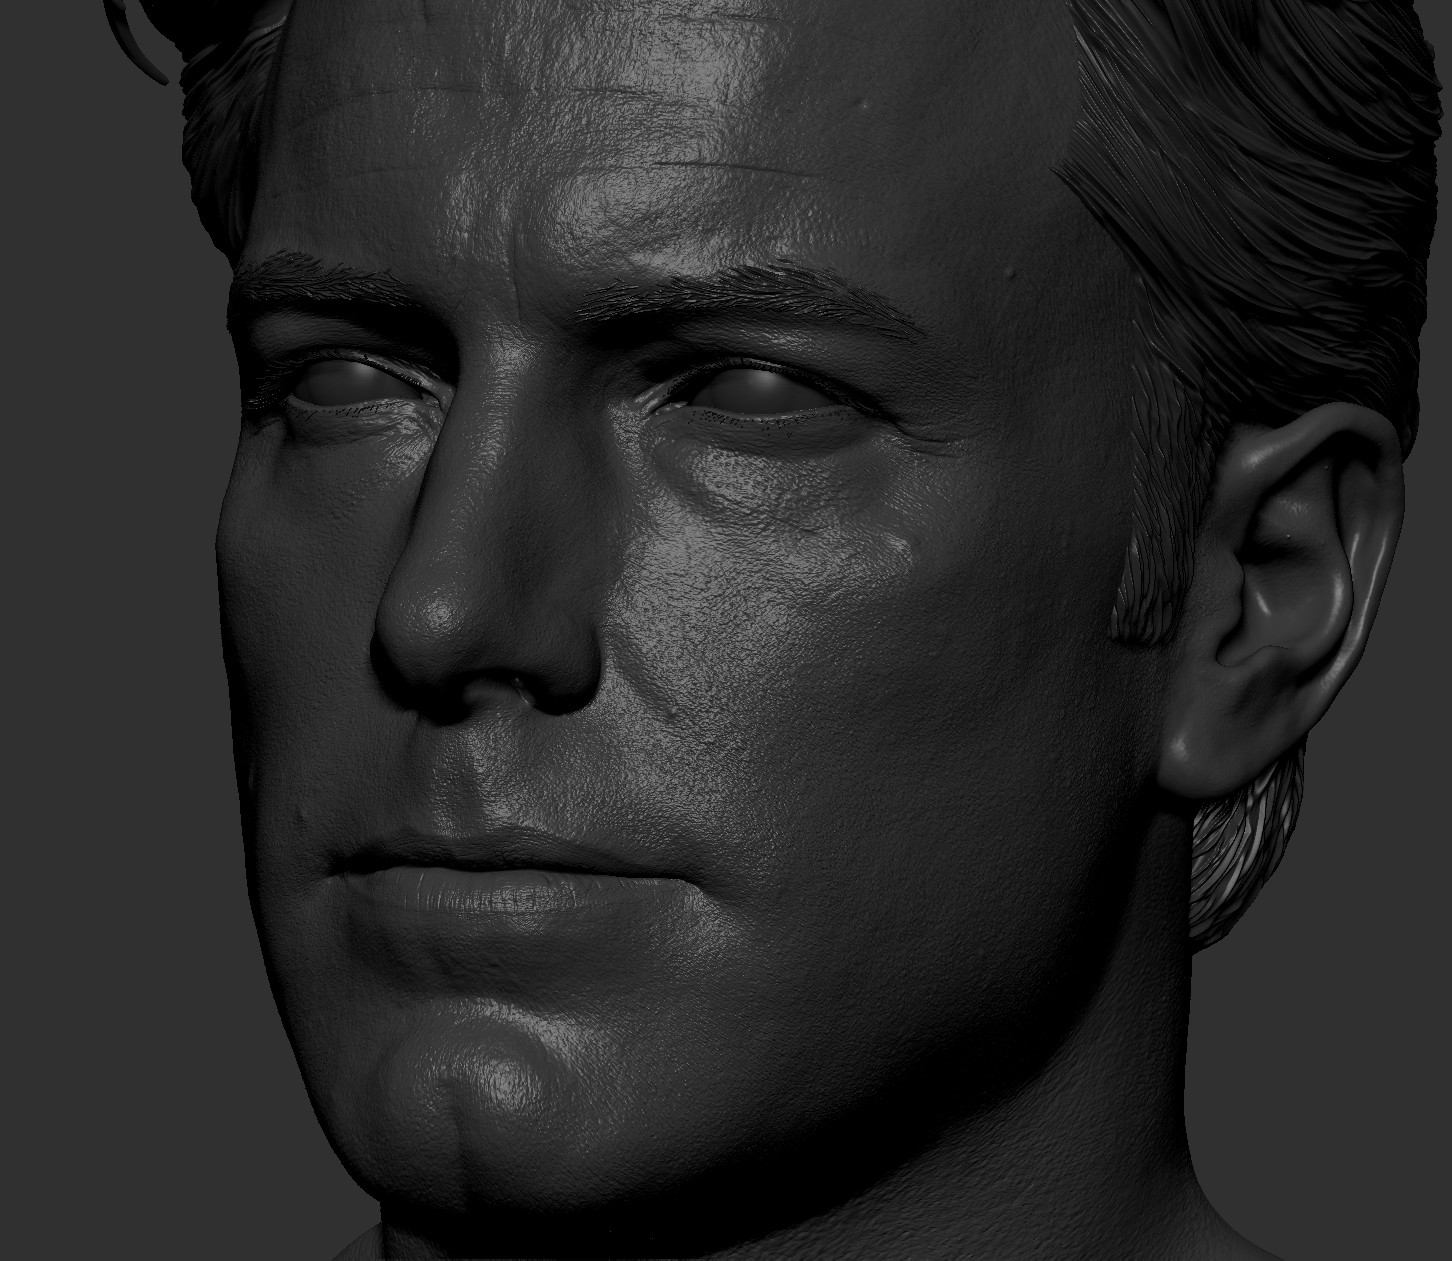 used Texturing XYZ for skin pores